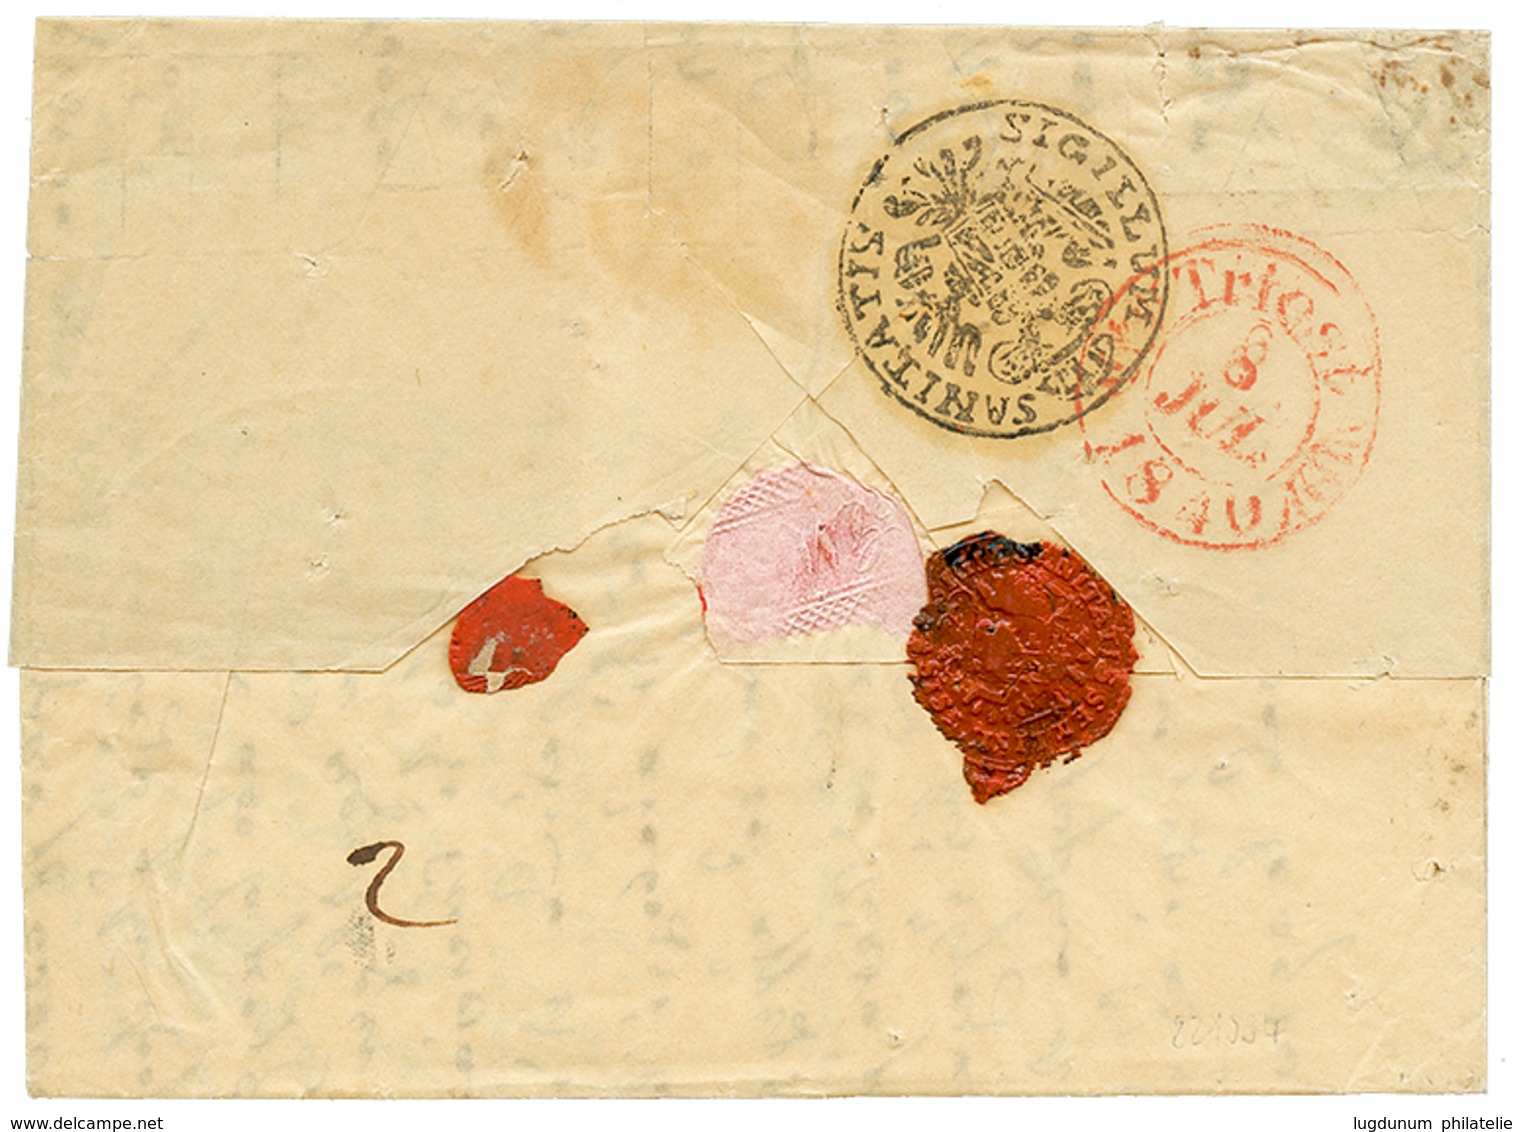 988 "SERRES" : 1840 SERRES (rare First Type) On DISINFECTED Entire Letter To TRIESTE. Verso, DISINFECTED Wax Seal + SIGI - Eastern Austria